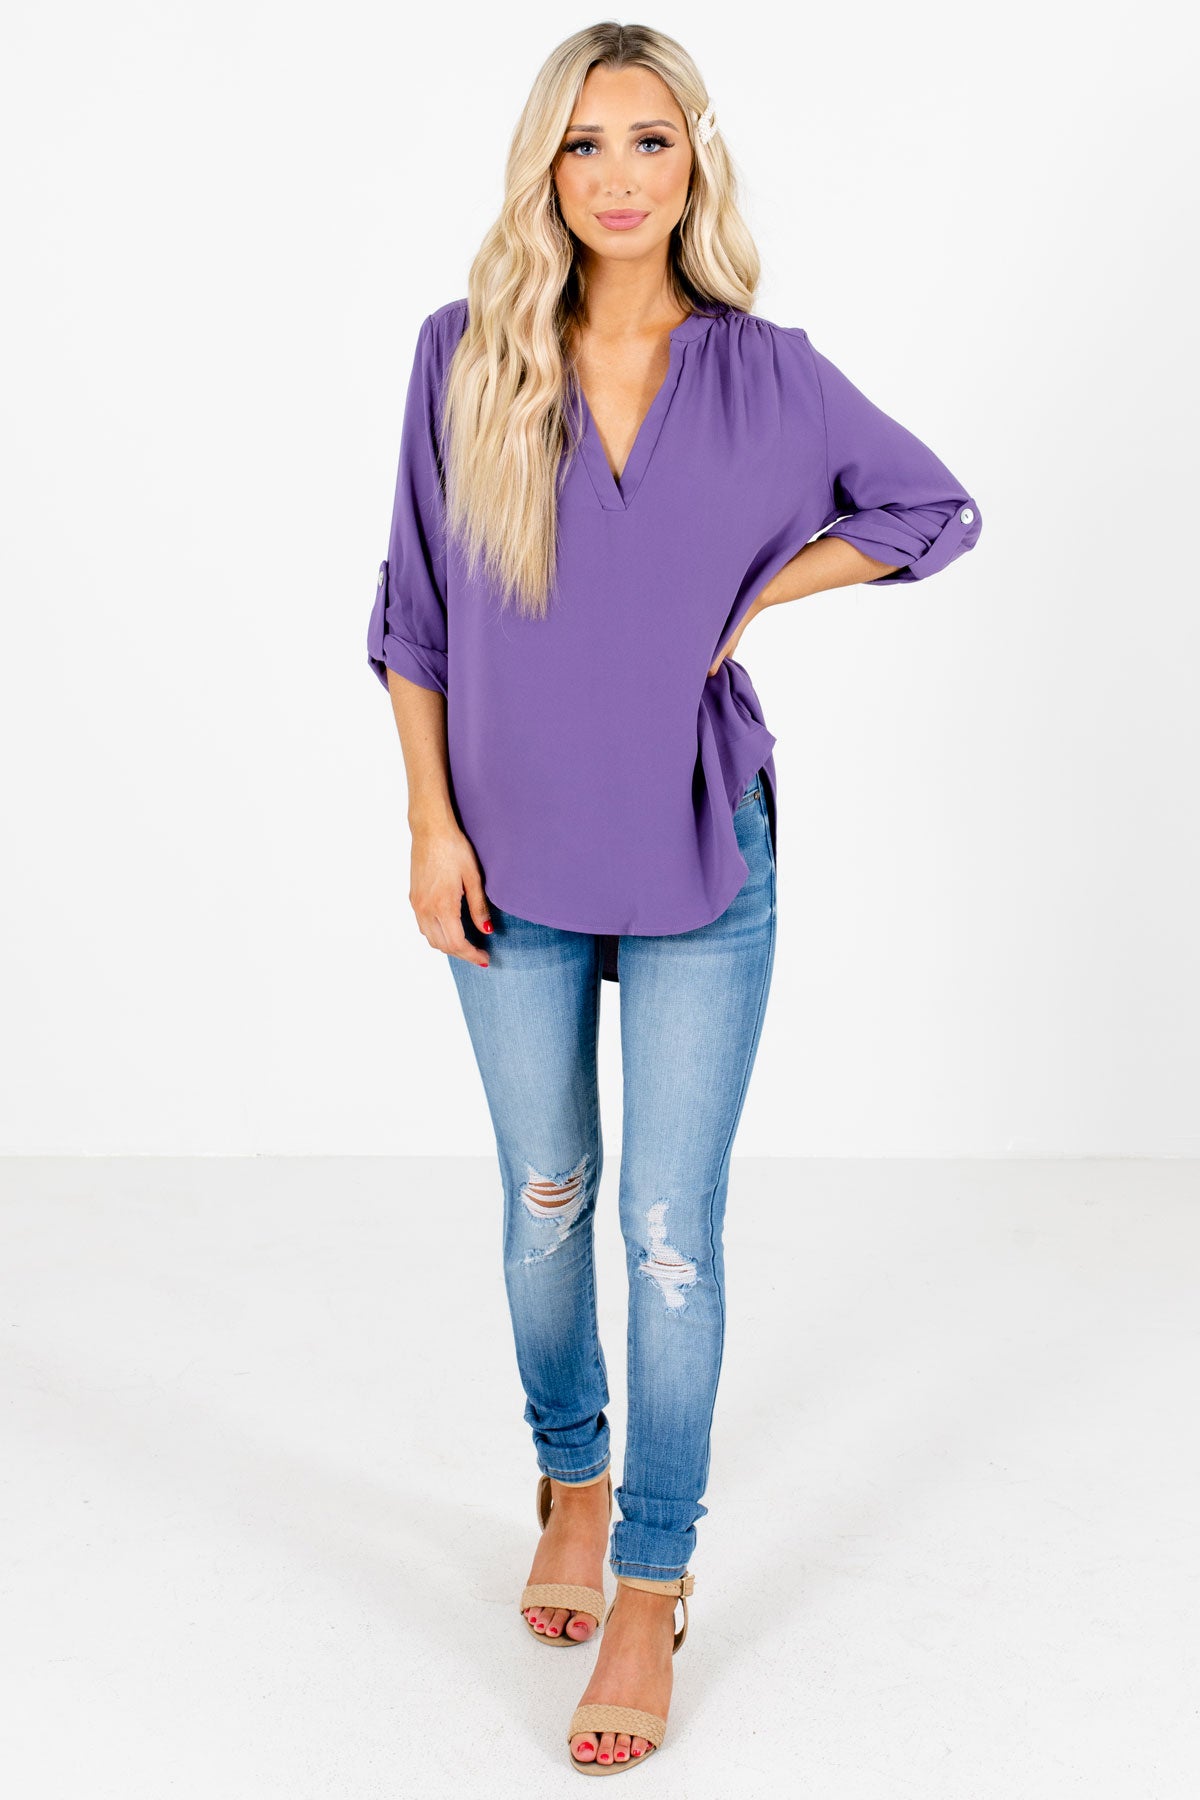 Women's Purple Spring and Summertime Boutique Clothing